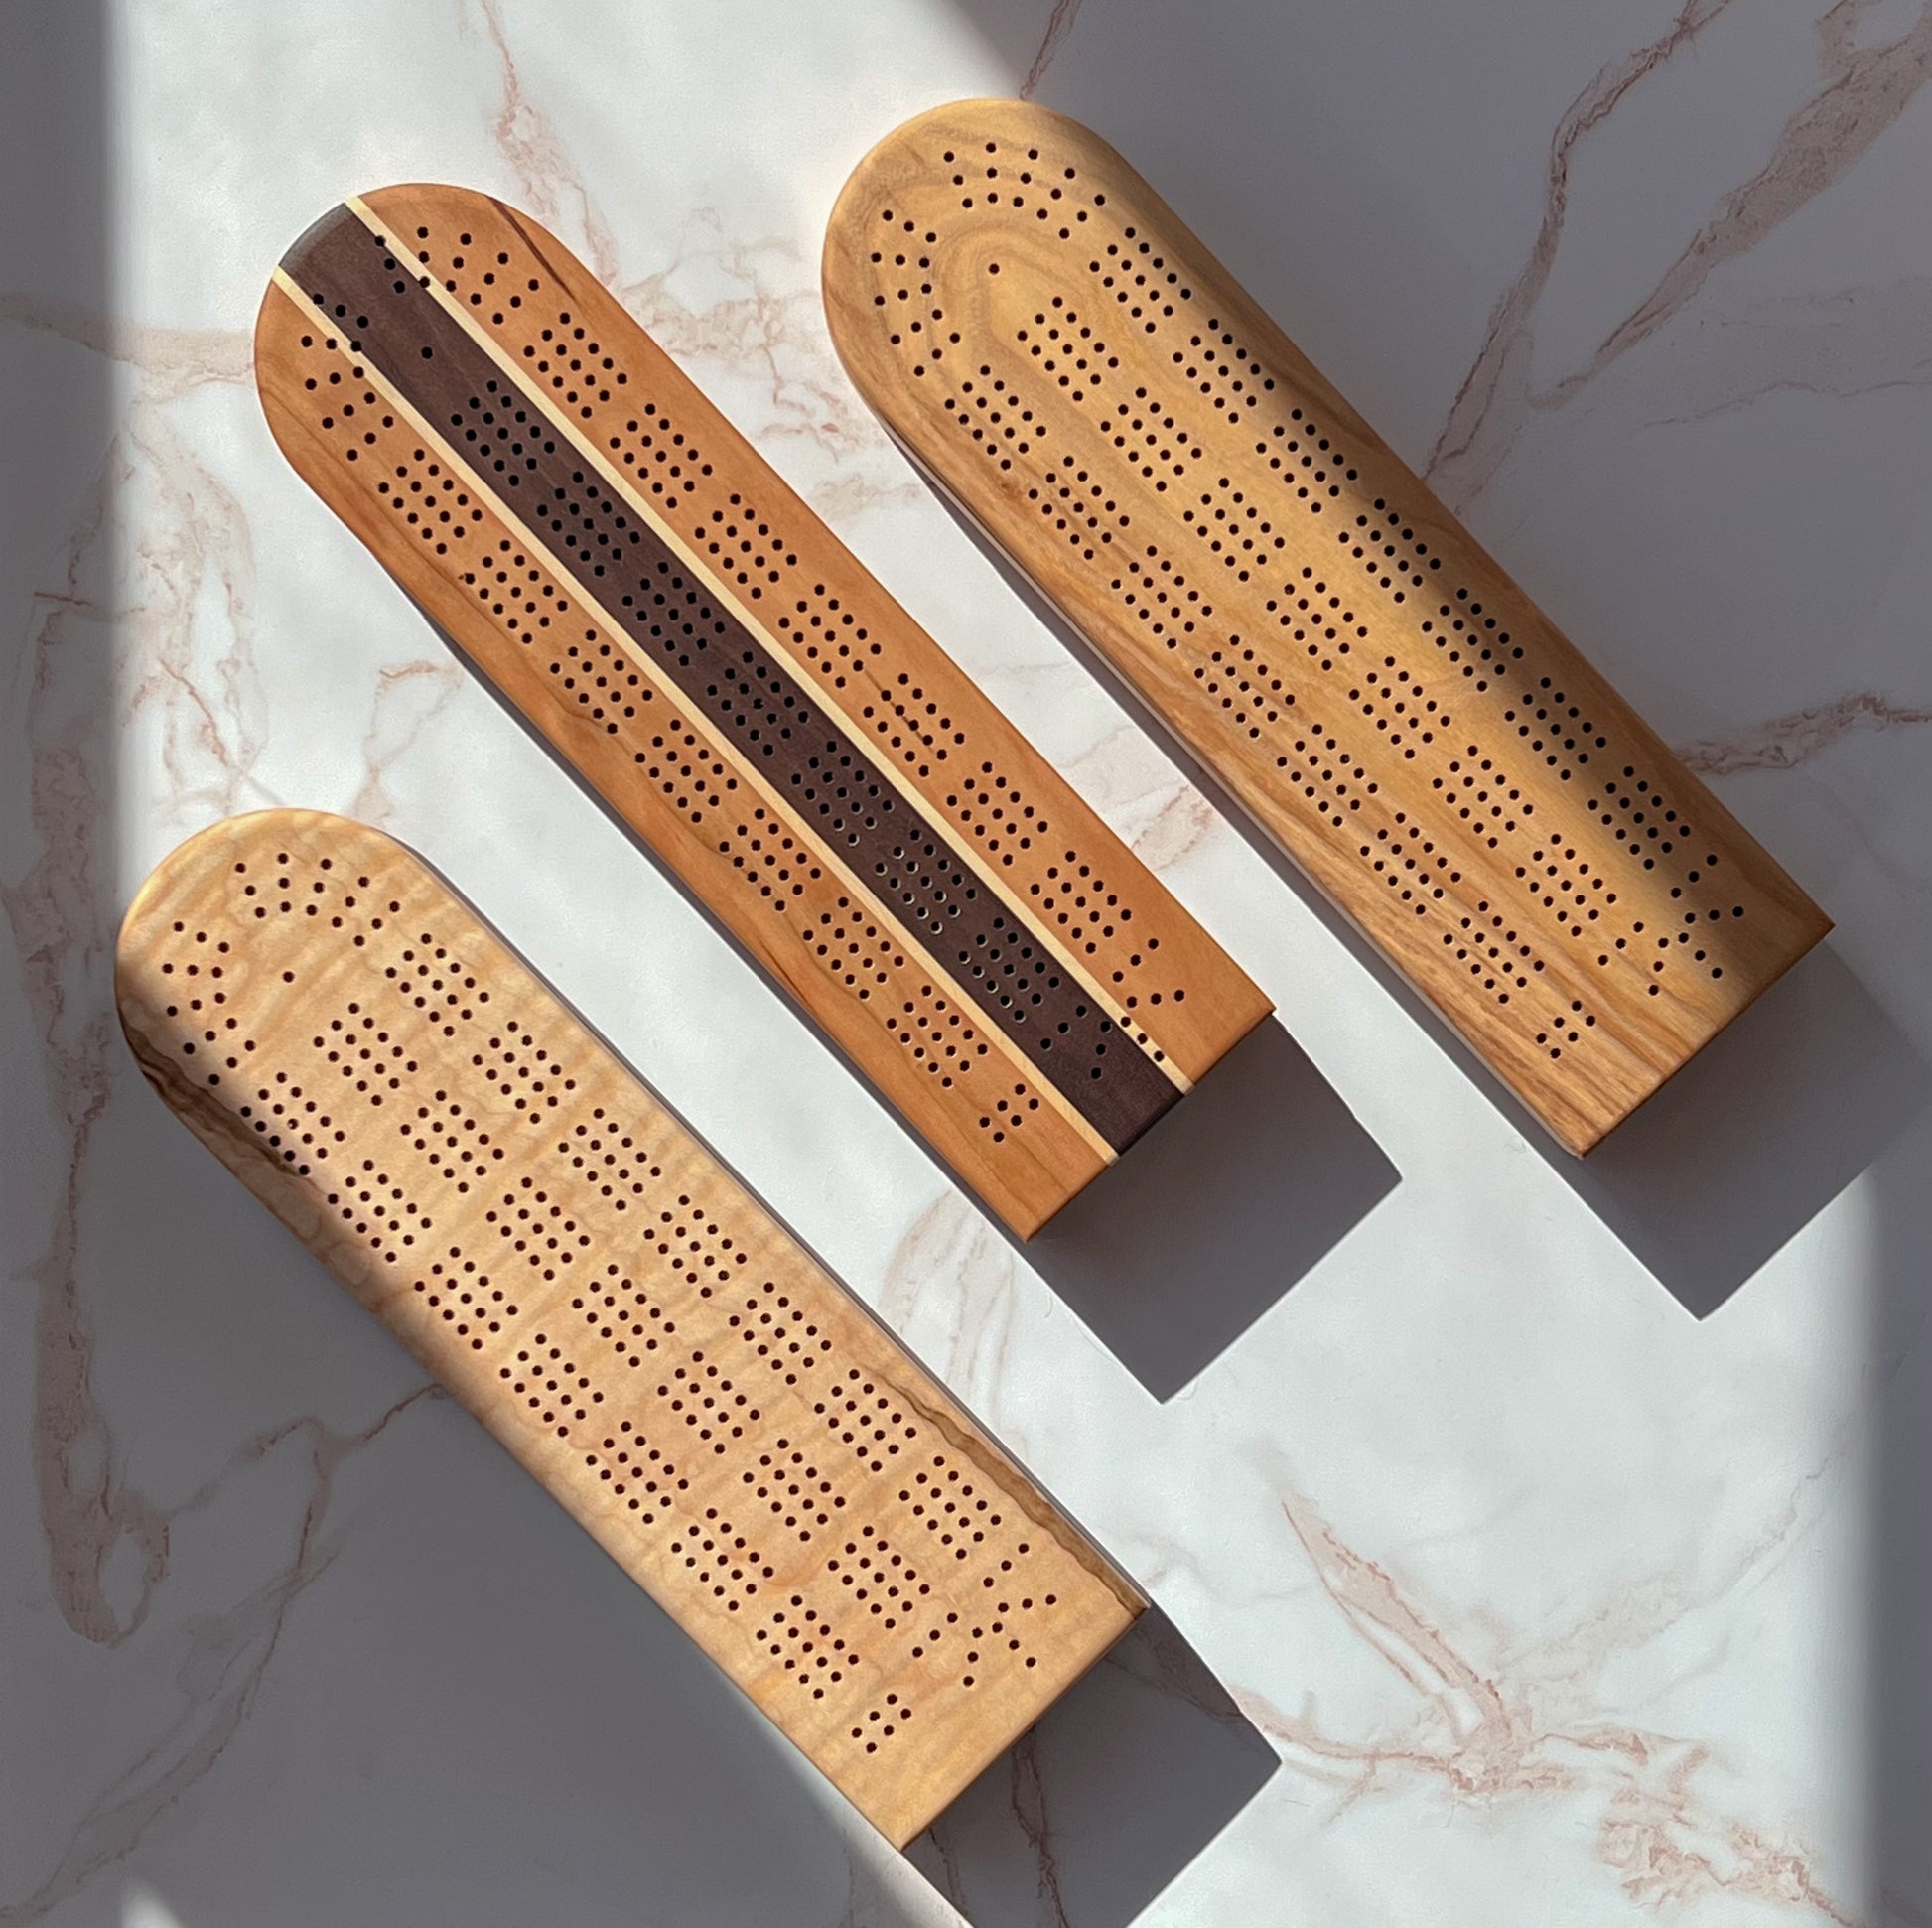 Three handmade wooden cribbage boards with swivel top card and peg storage in 3 different shades of natural wood, one has a dark wood stripe down the middle for an elegant twist made by Camino Woodshop in Milwaukee